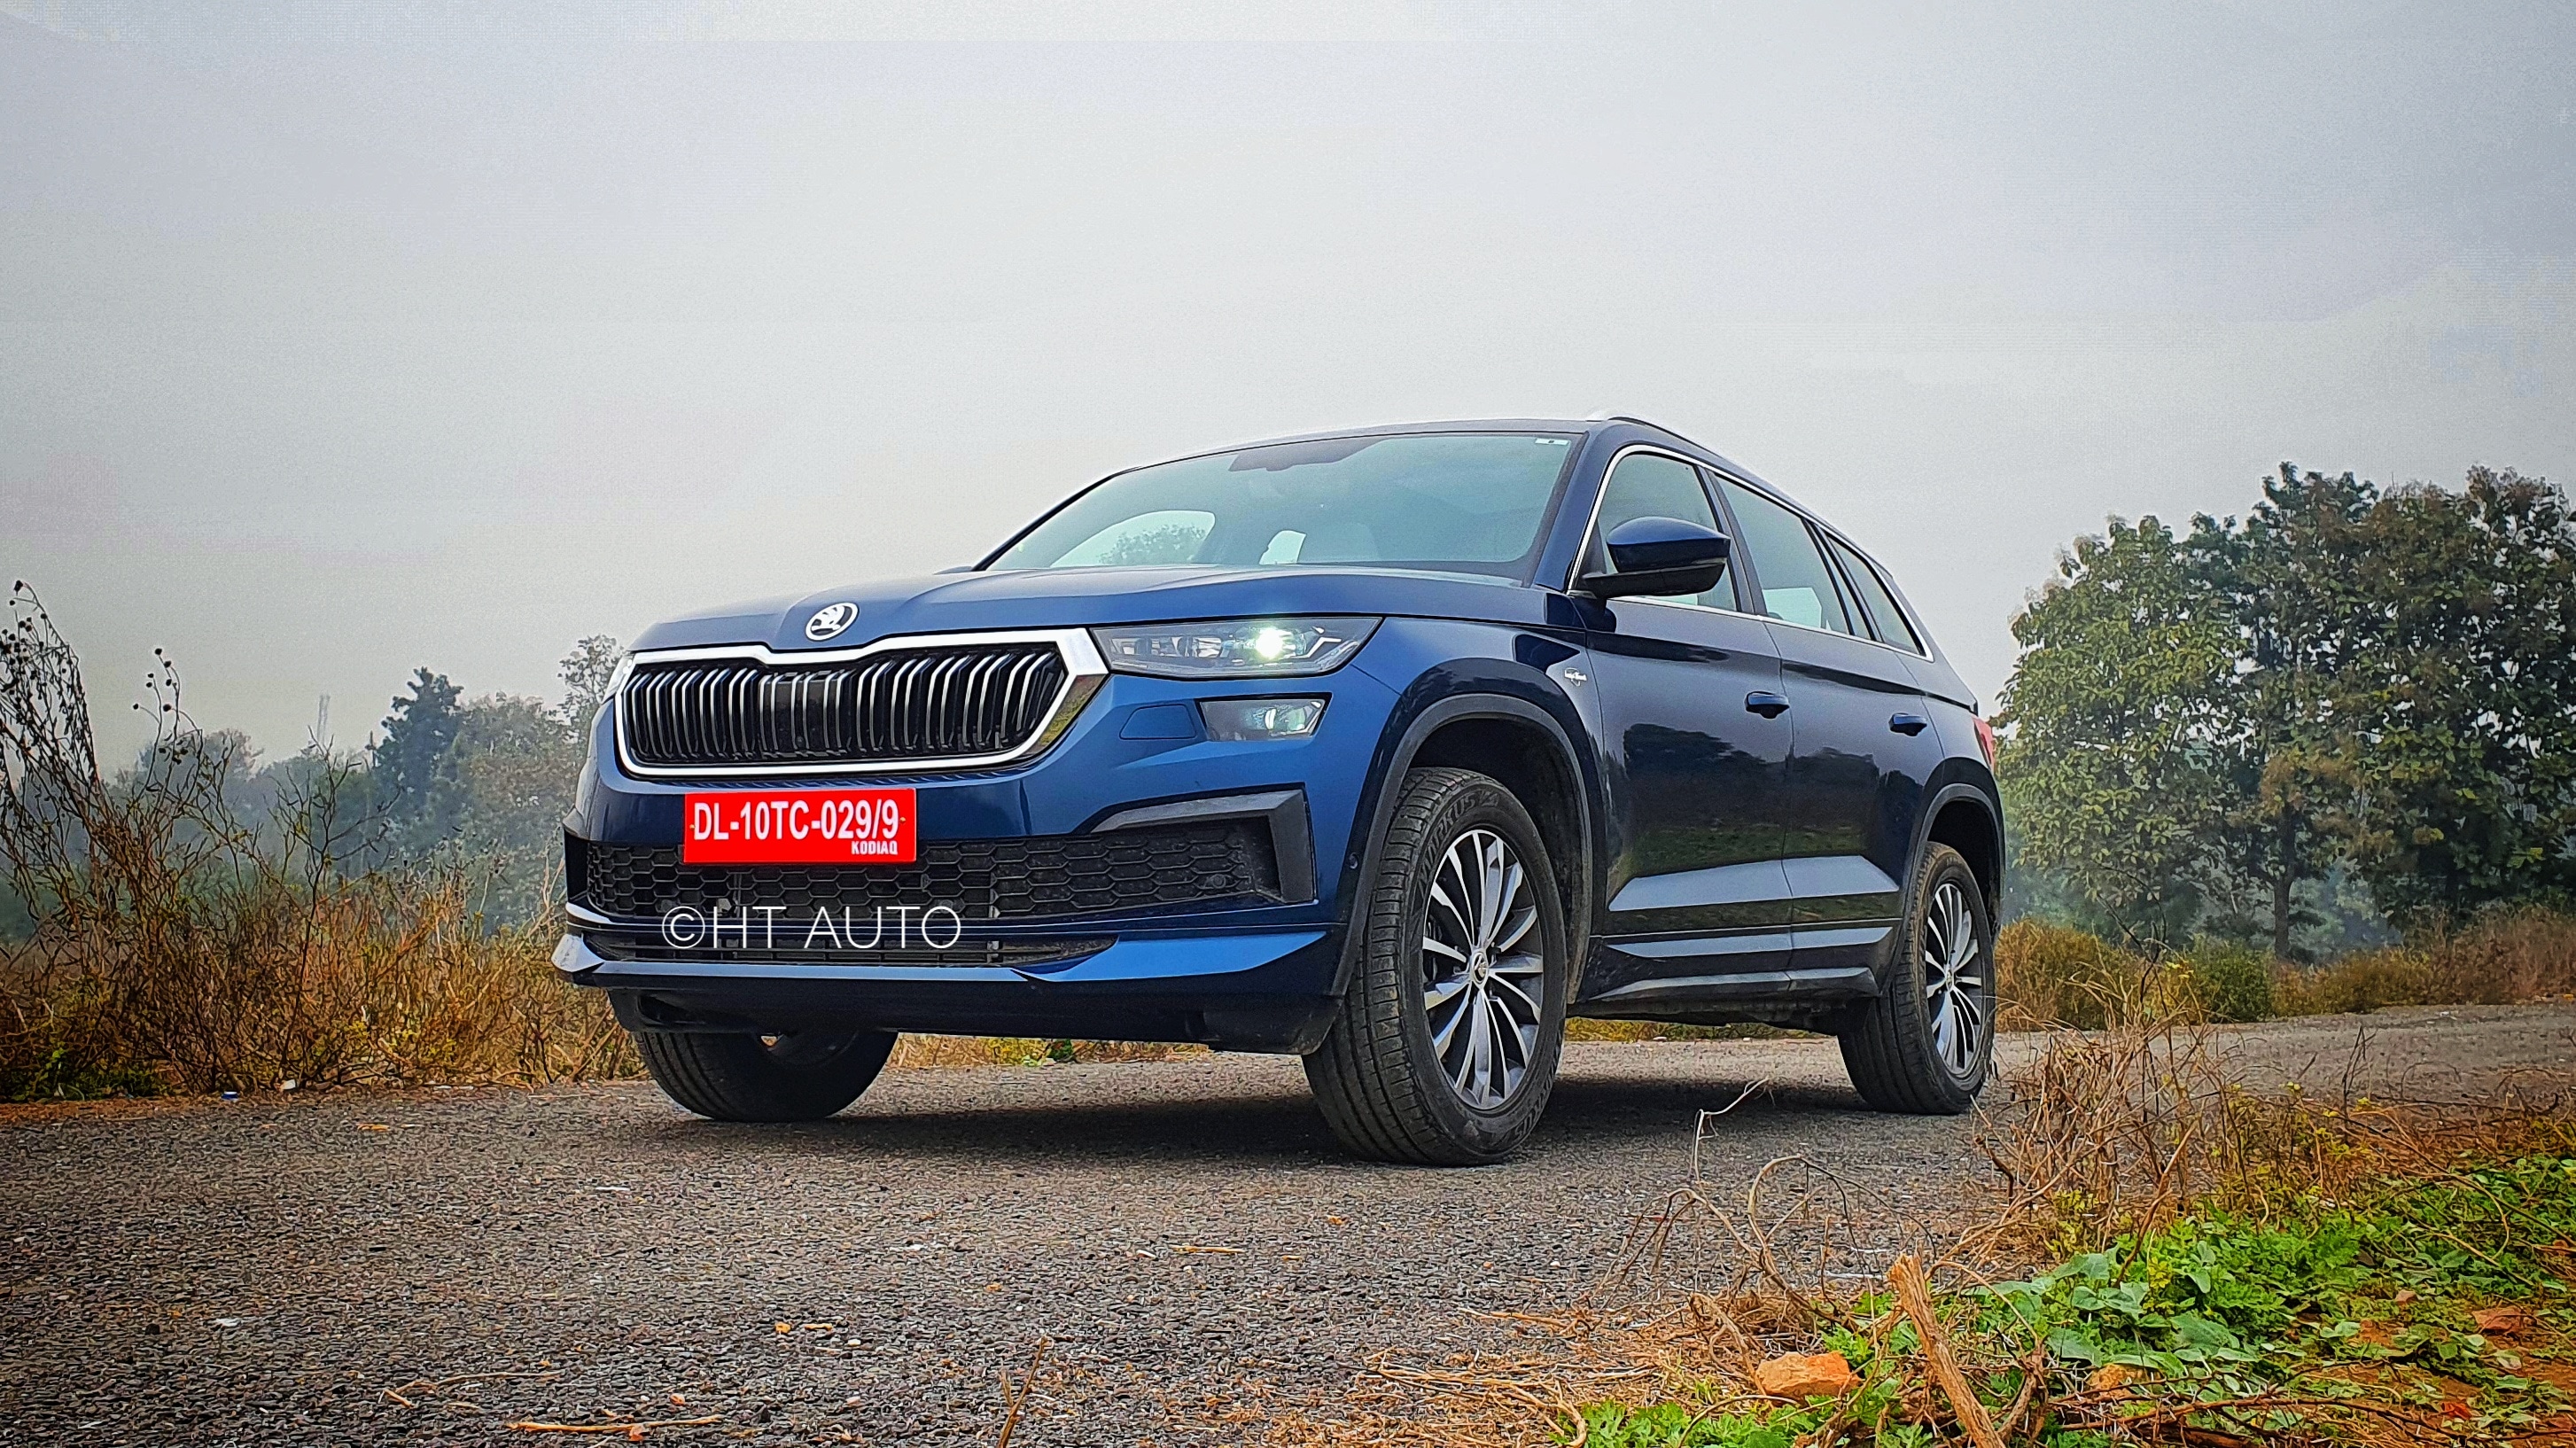 Facelifted 2022 Skoda Kodiaq Launched In India At Rs 34.99 Lakh